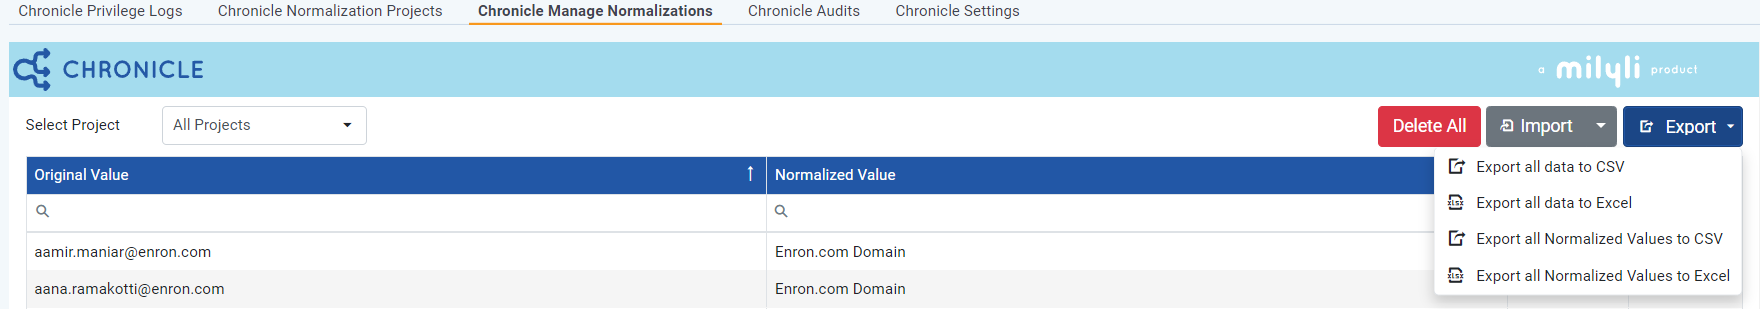 Chronicle Manage Name export button